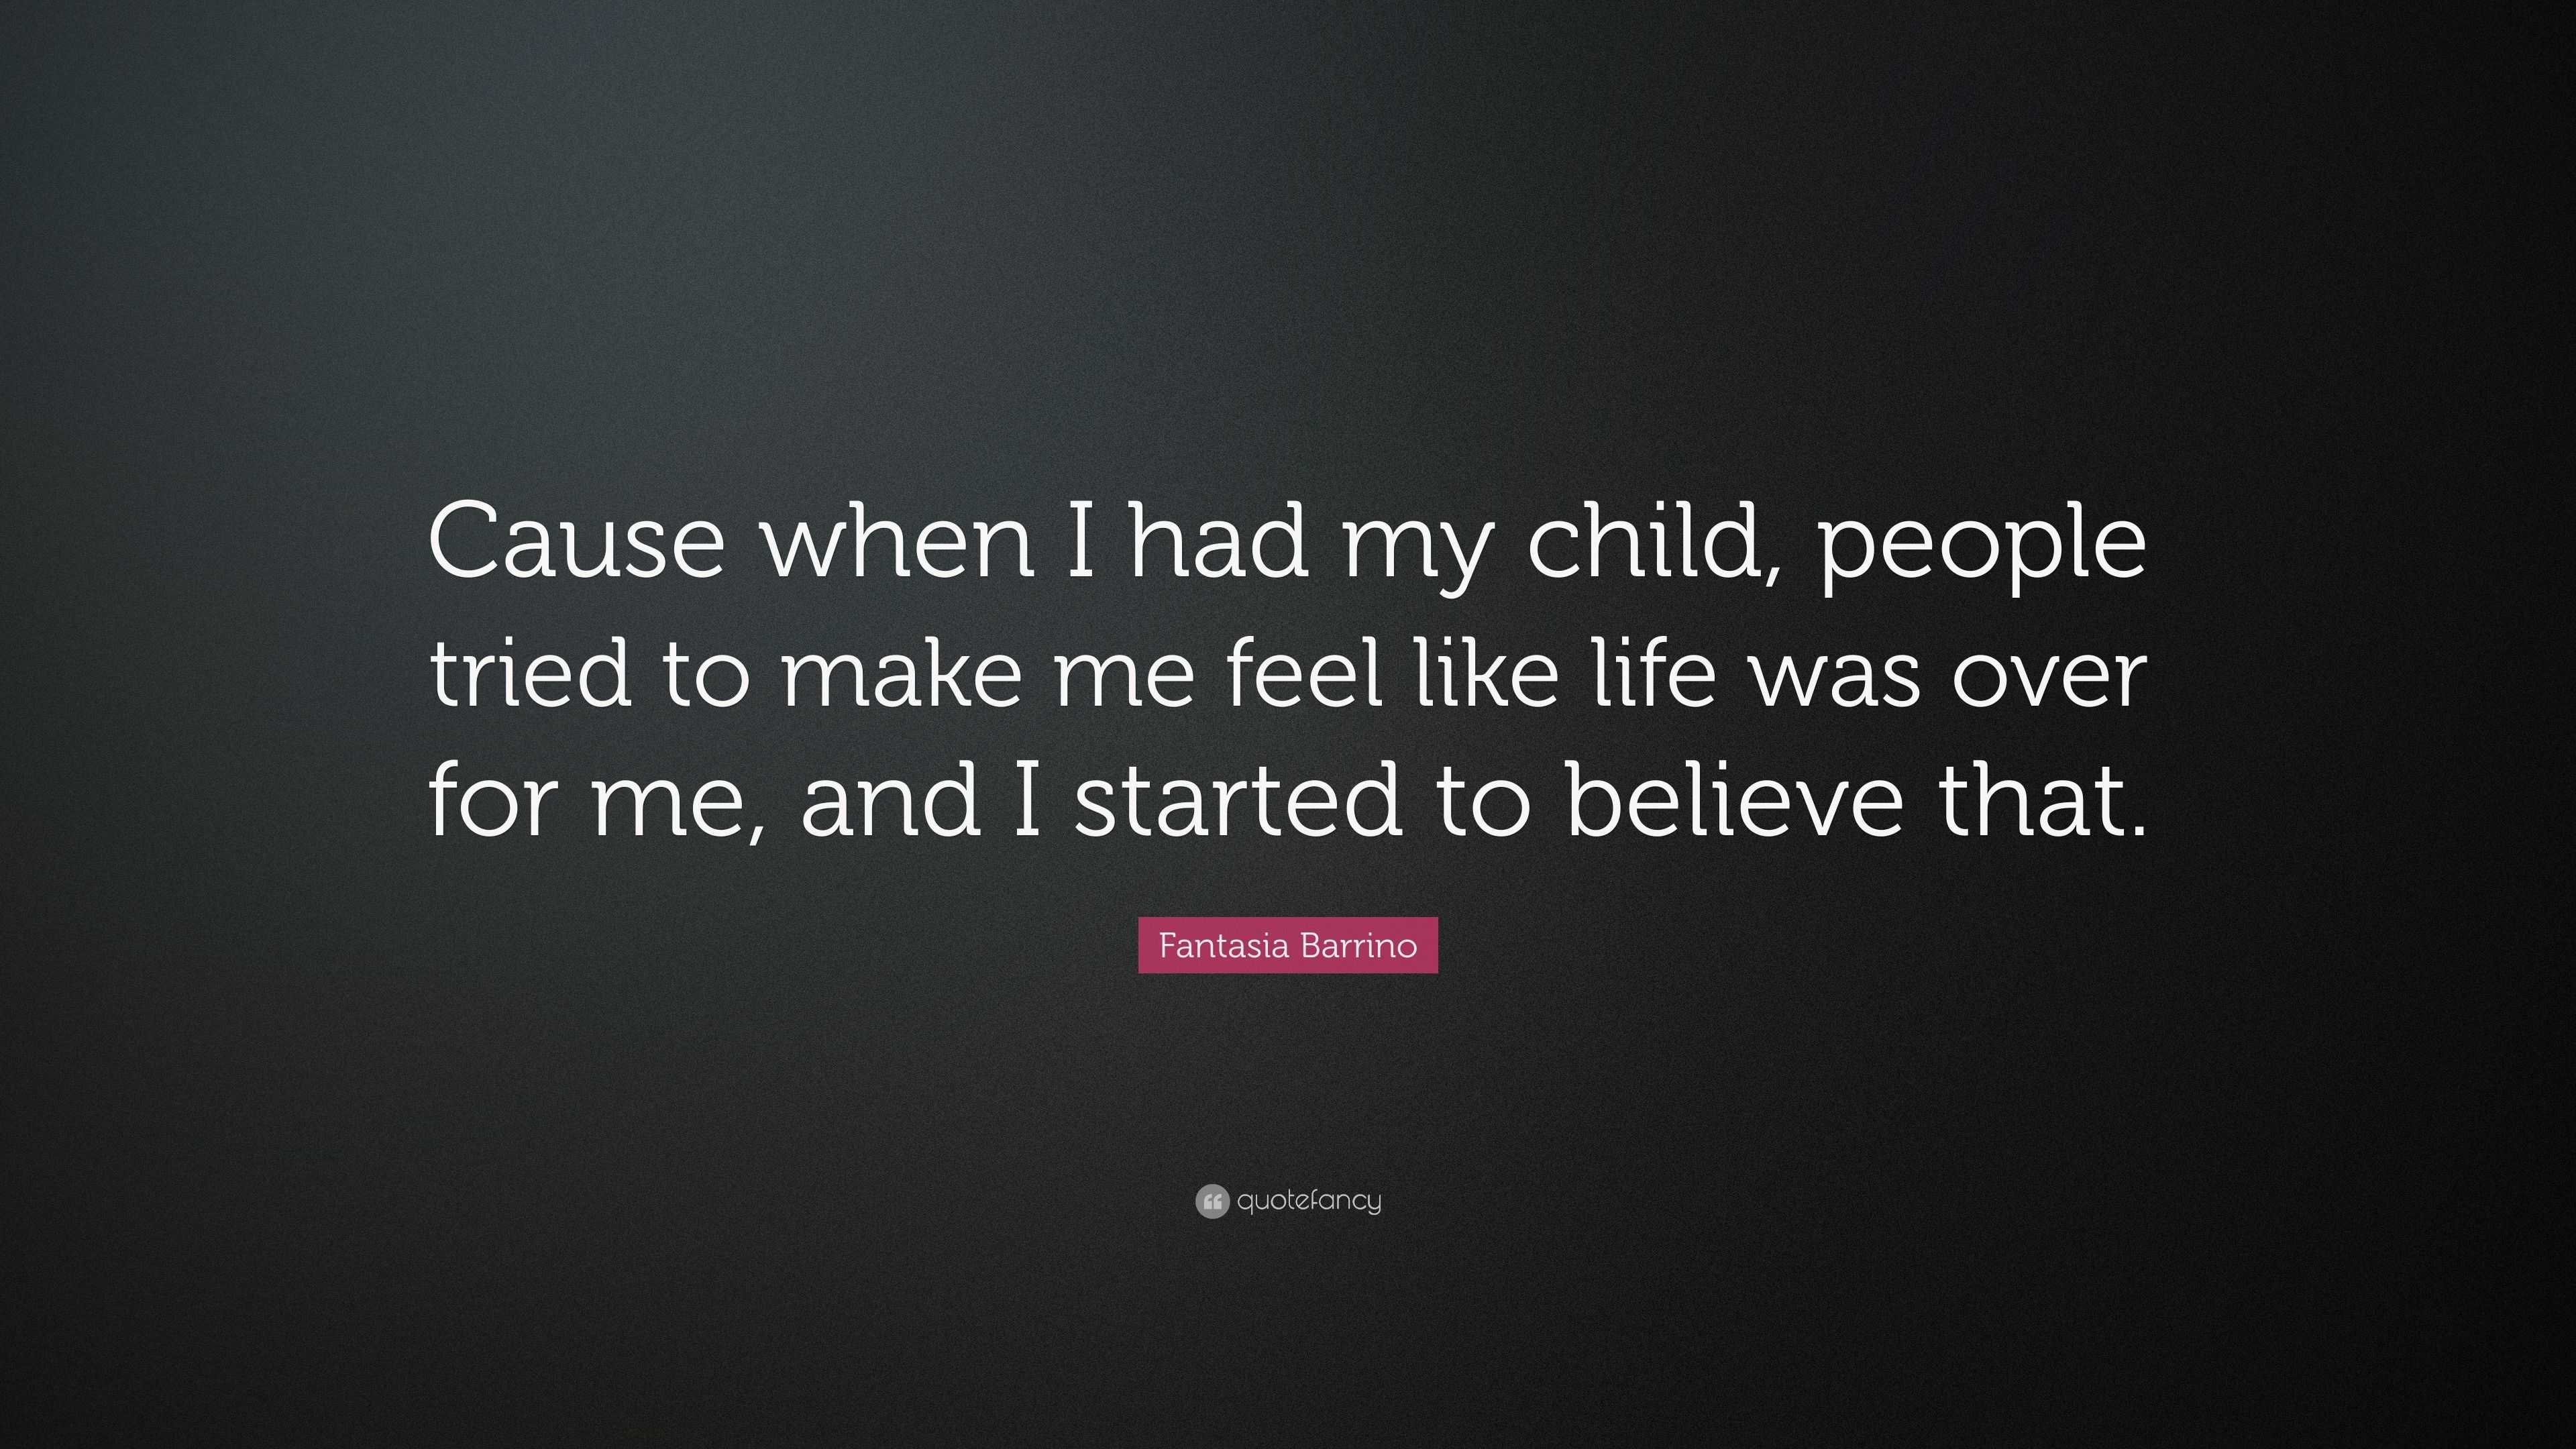 Fantasia Barrino Quote: “Cause when I had my child, people tried to ...